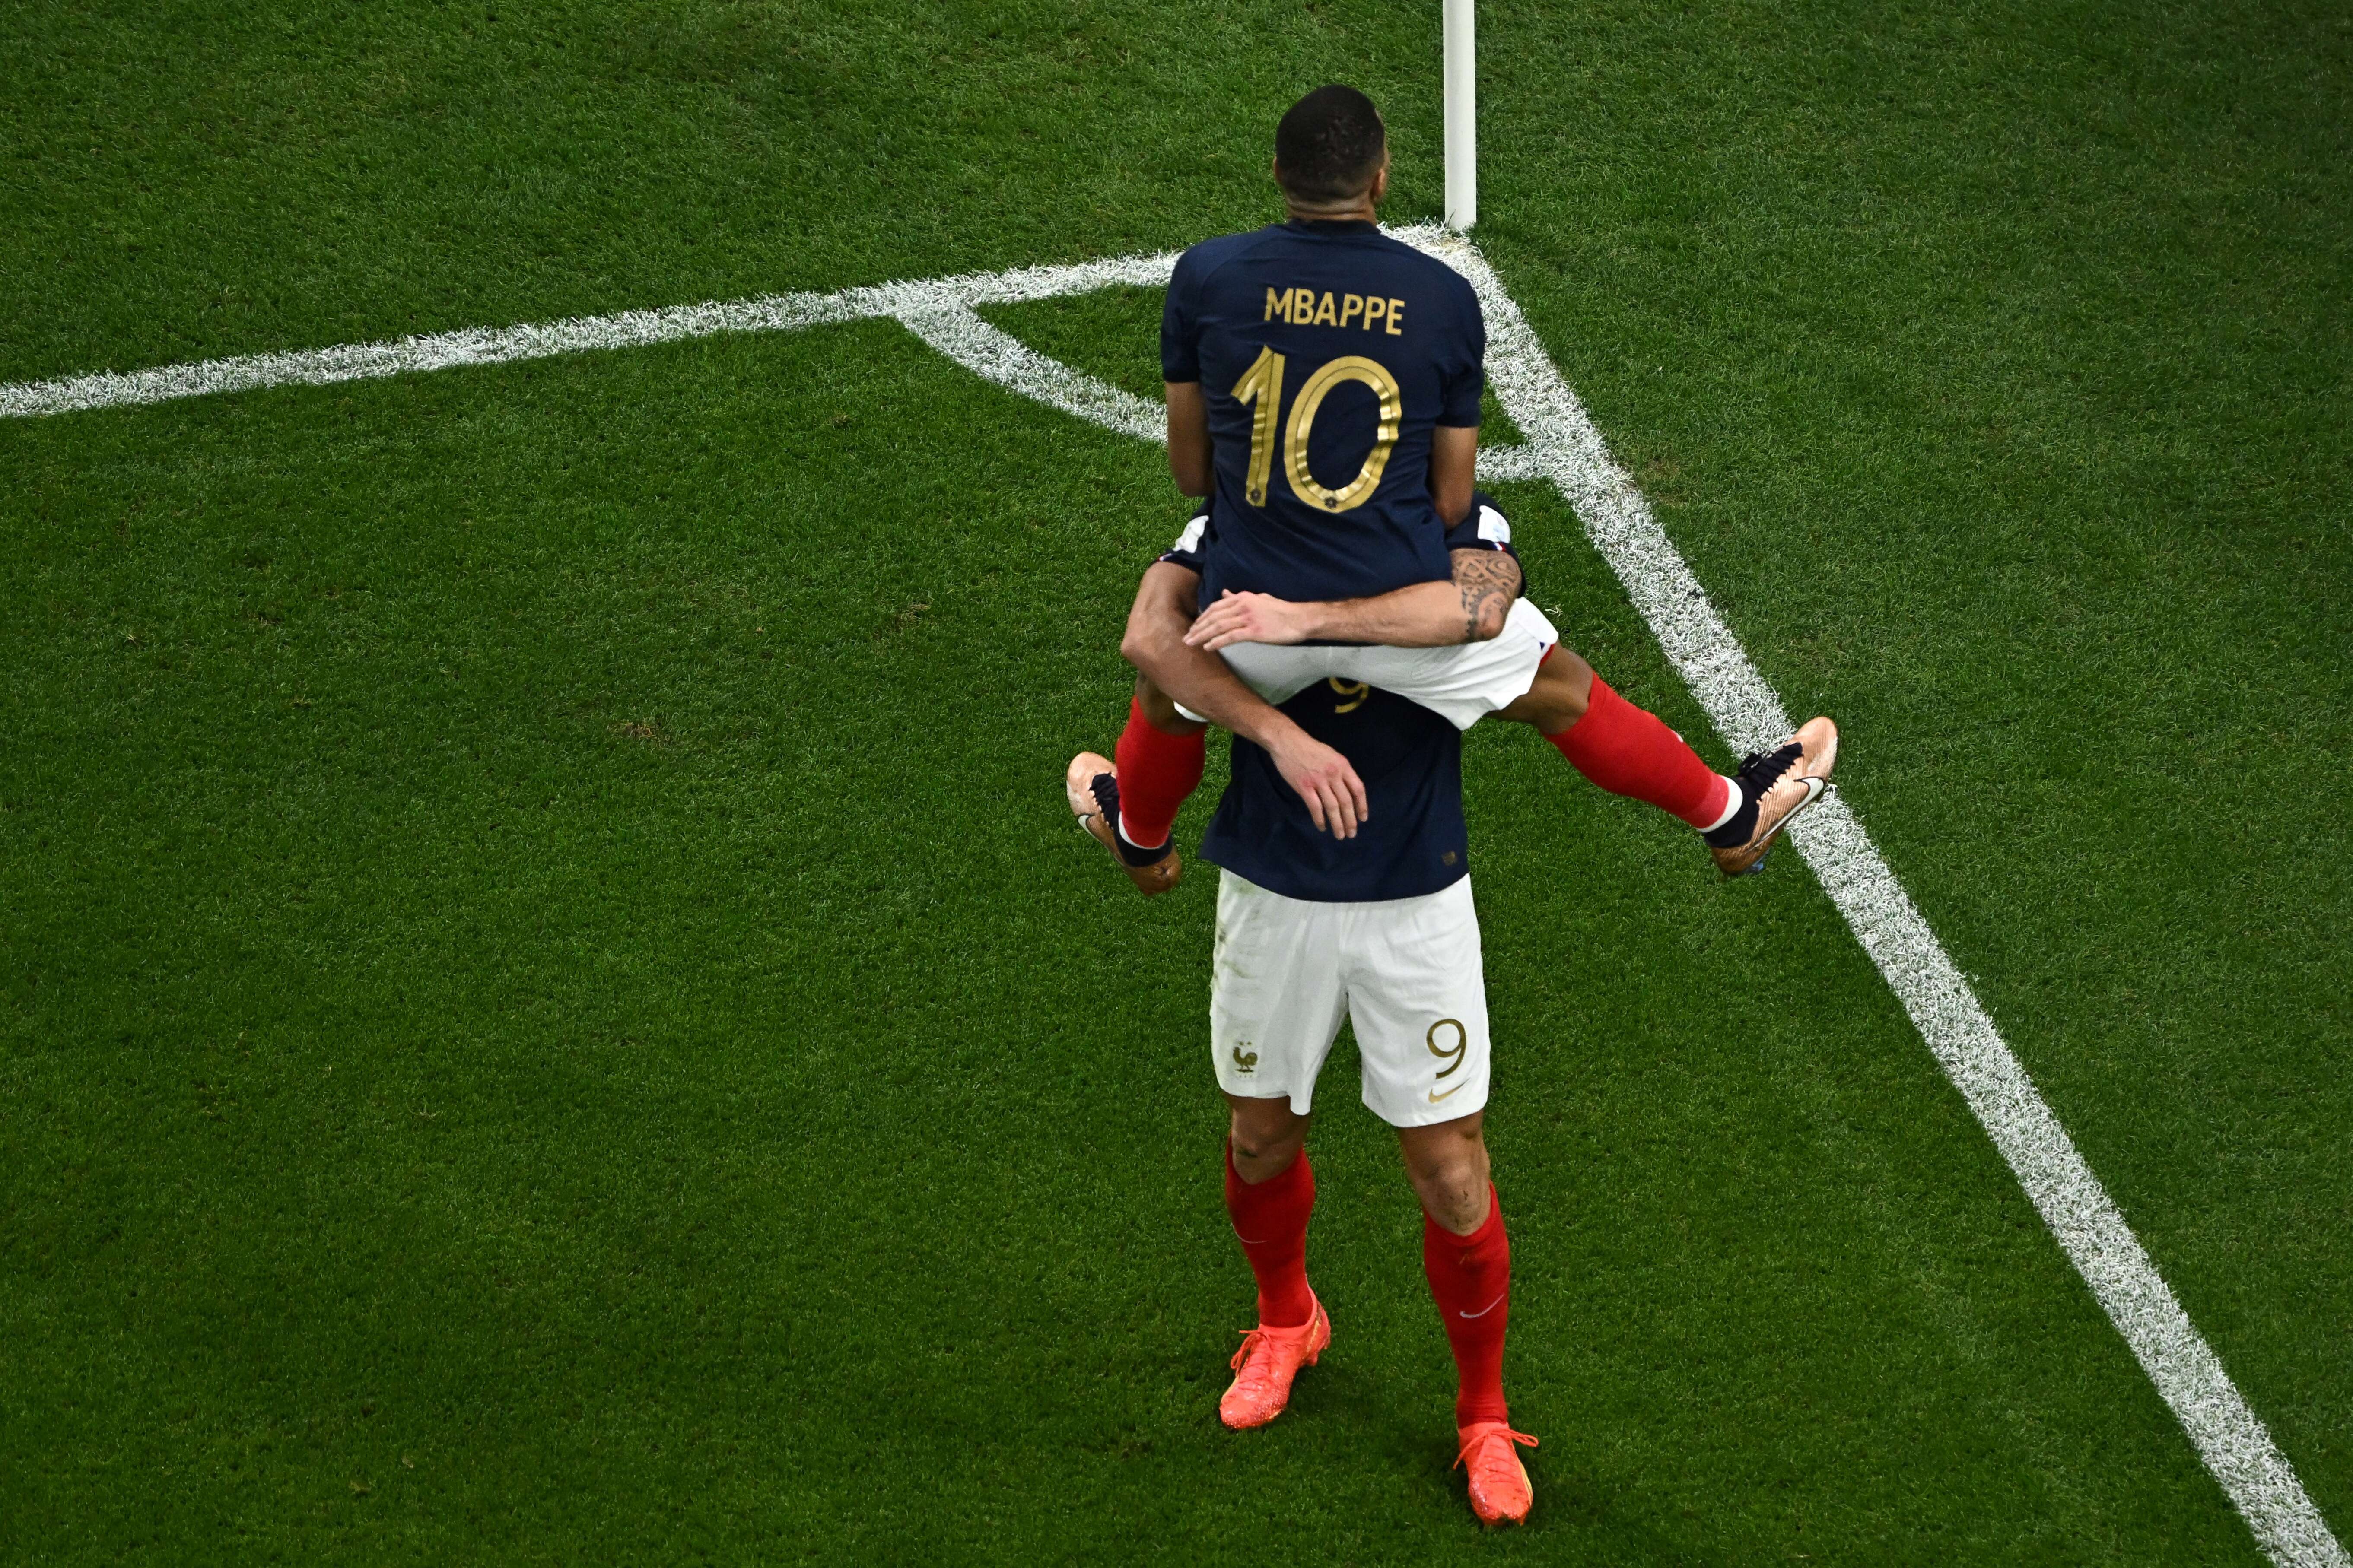 France's forward #09 Olivier Giroud (R) celebrates with France's forward #10 Kylian Mbappe after scoring his team's first goal during the Qatar 2022 World Cup round of 16 football match between France and Poland at the Al-Thumama Stadium in Doha on December 4, 2022. (Photo by MANAN VATSYAYANA / AFP)